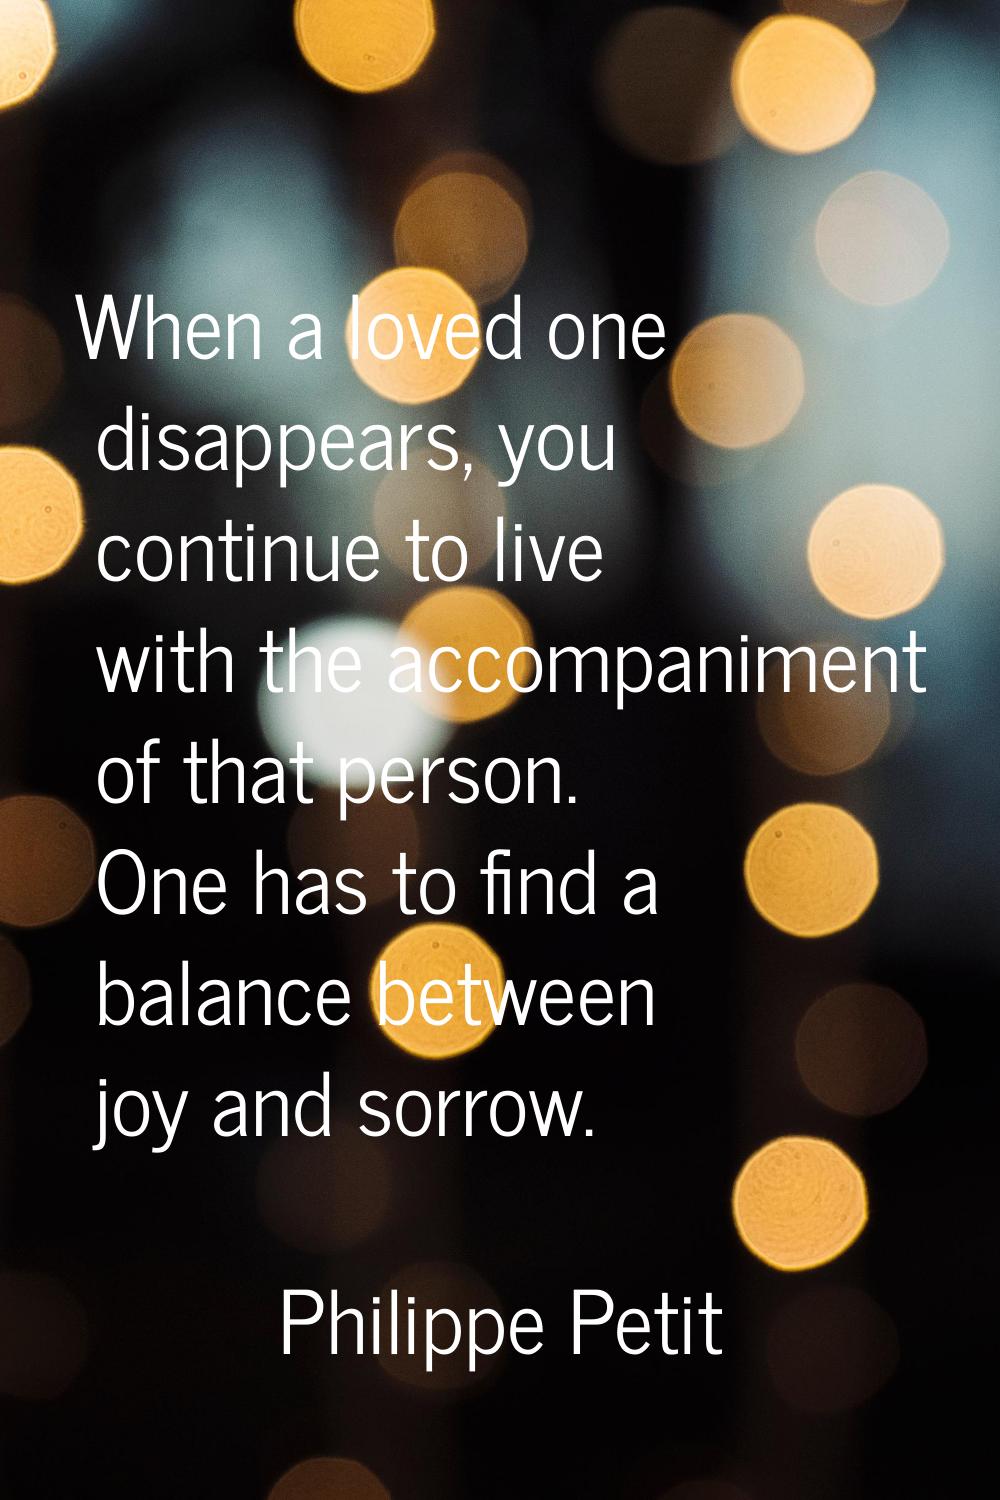 When a loved one disappears, you continue to live with the accompaniment of that person. One has to